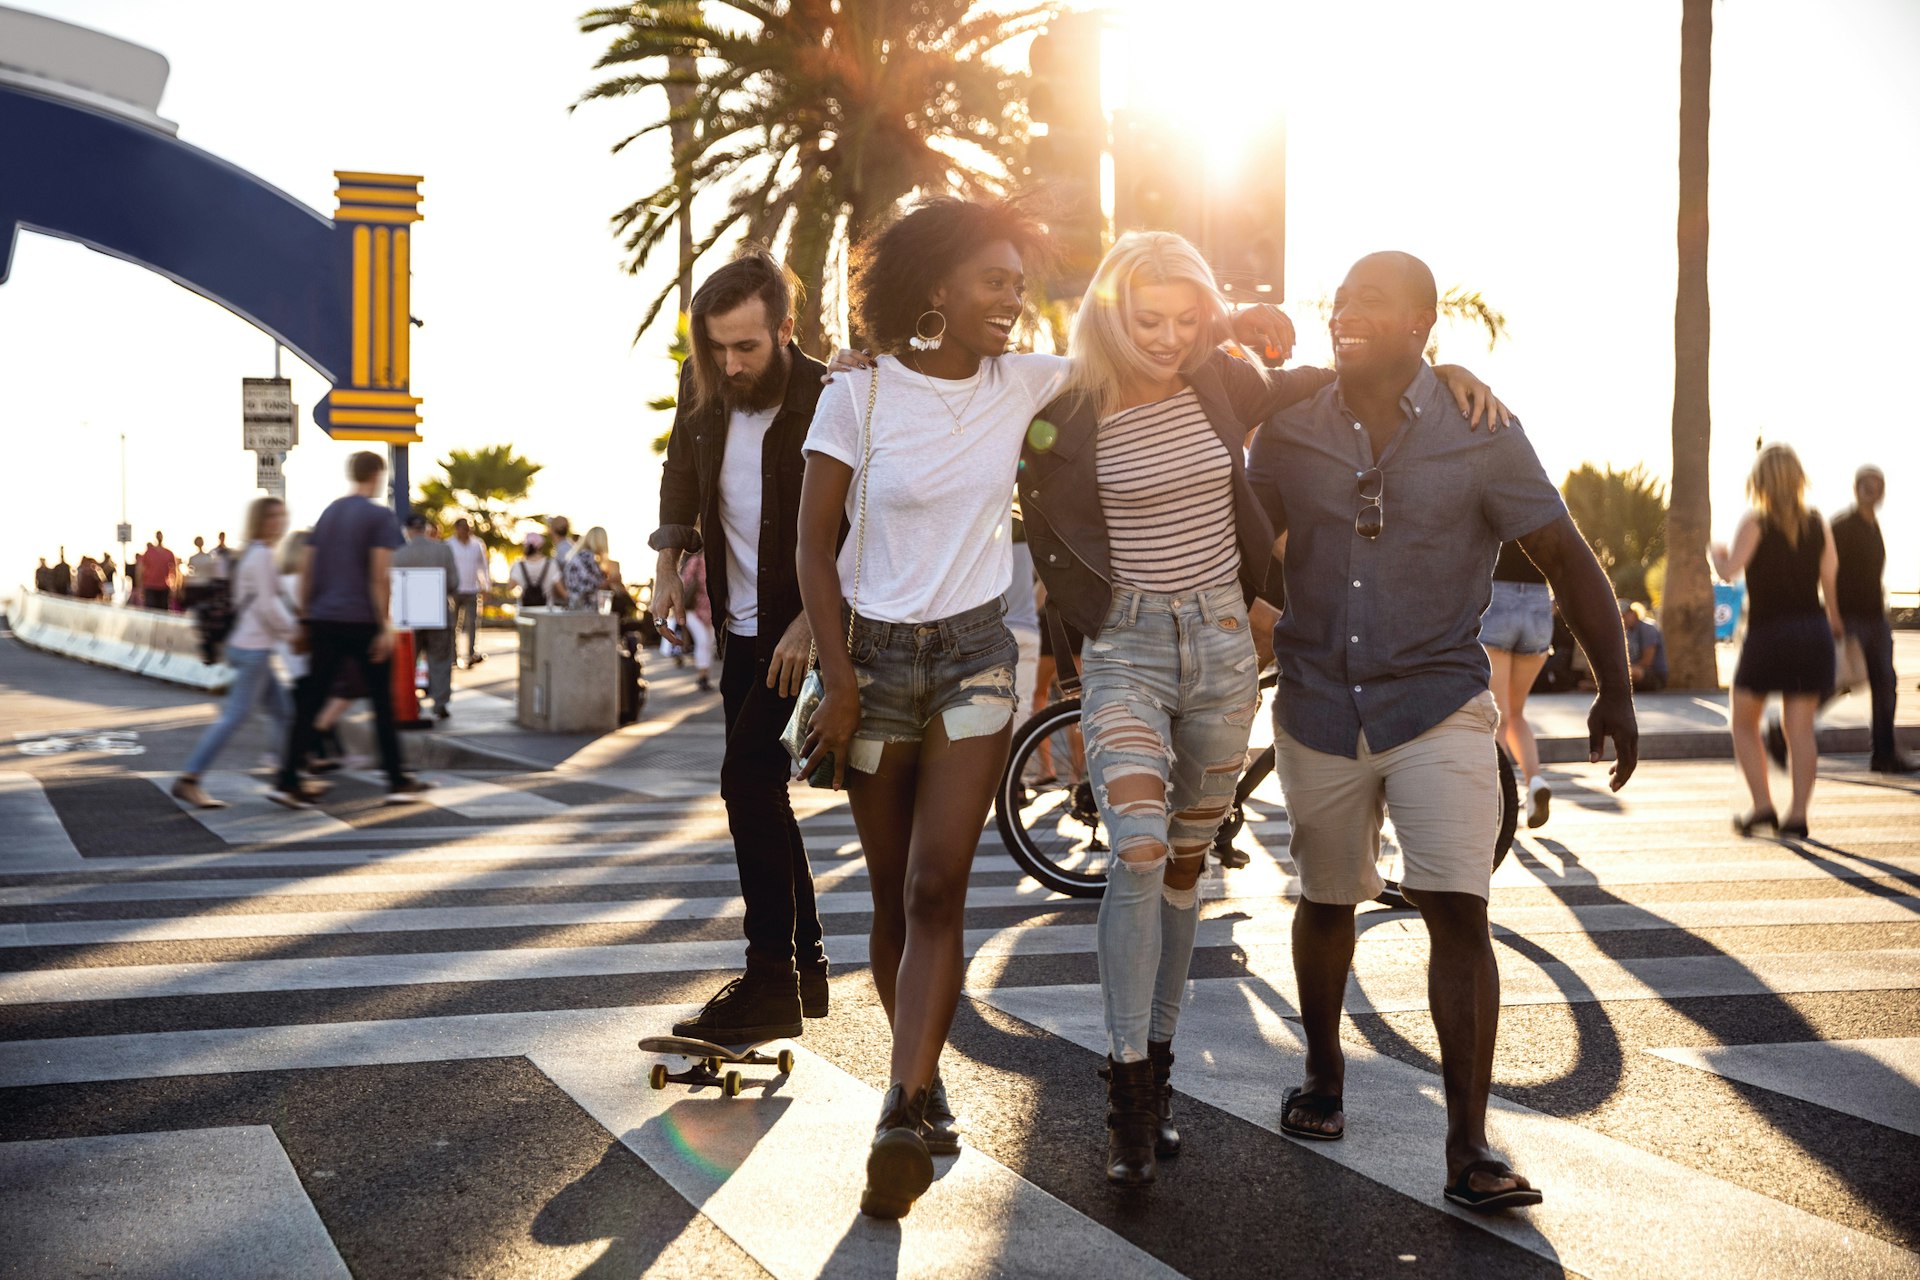  A group of friends laughing as they walk along a street in Santa Monica